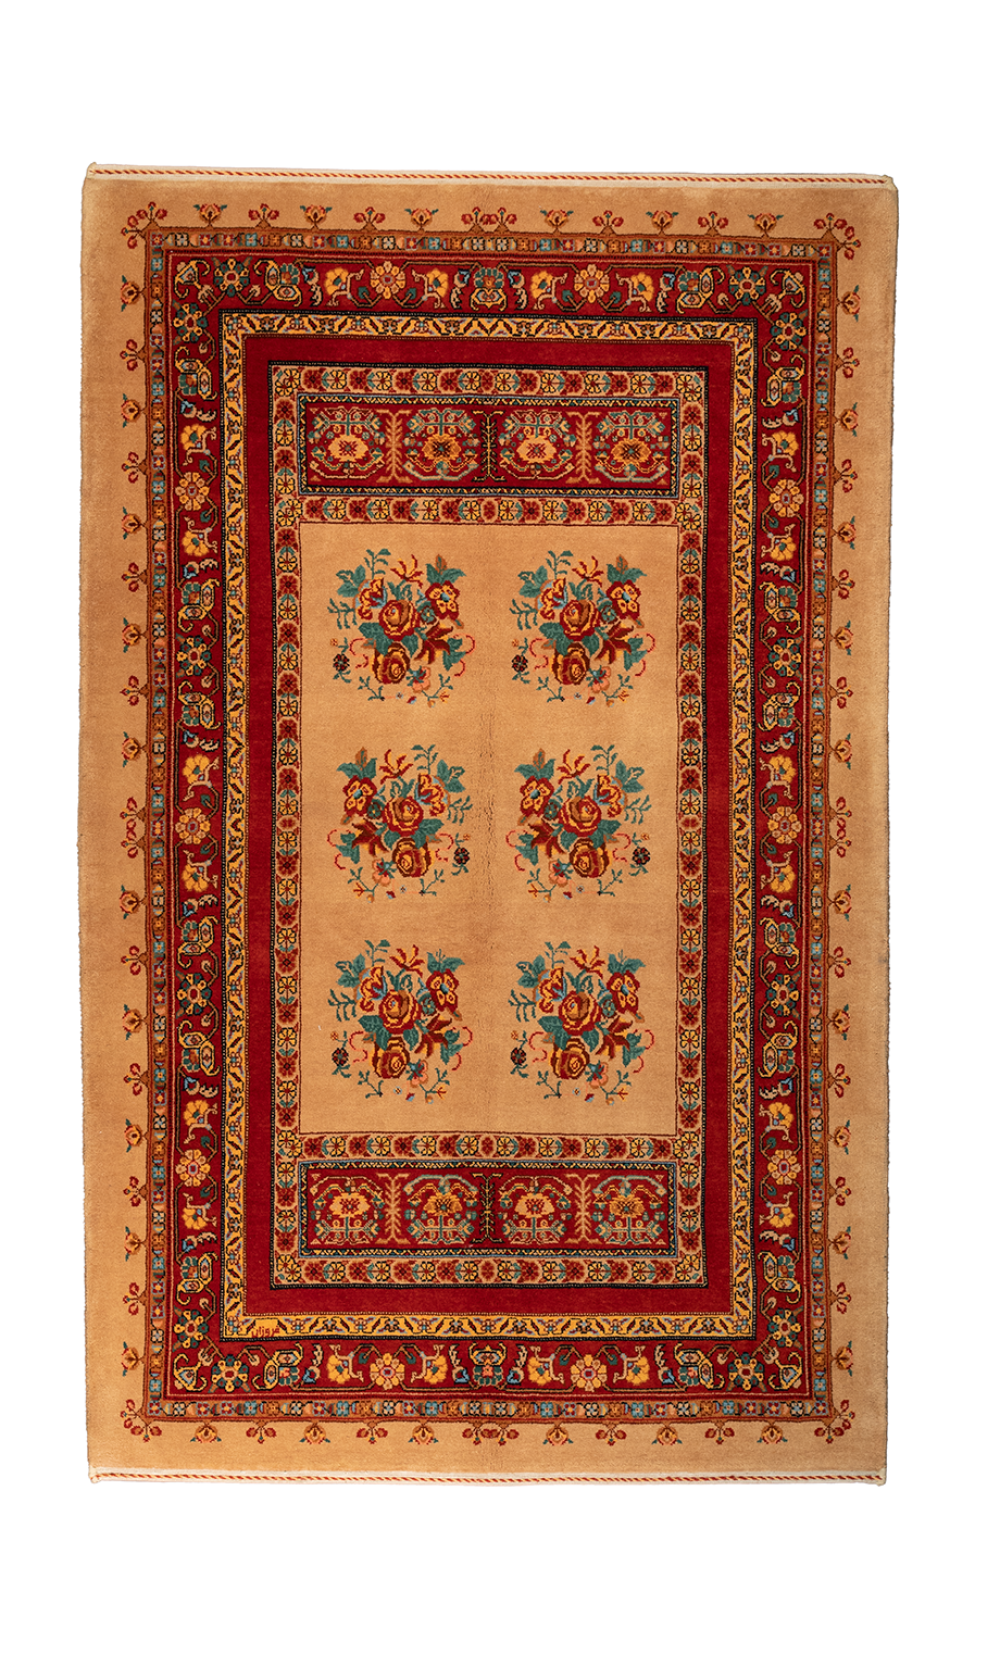 HANDMADE RUG IN WOOL & CREAM COLOR WITH VEGETABLE DYED ISFAHAN